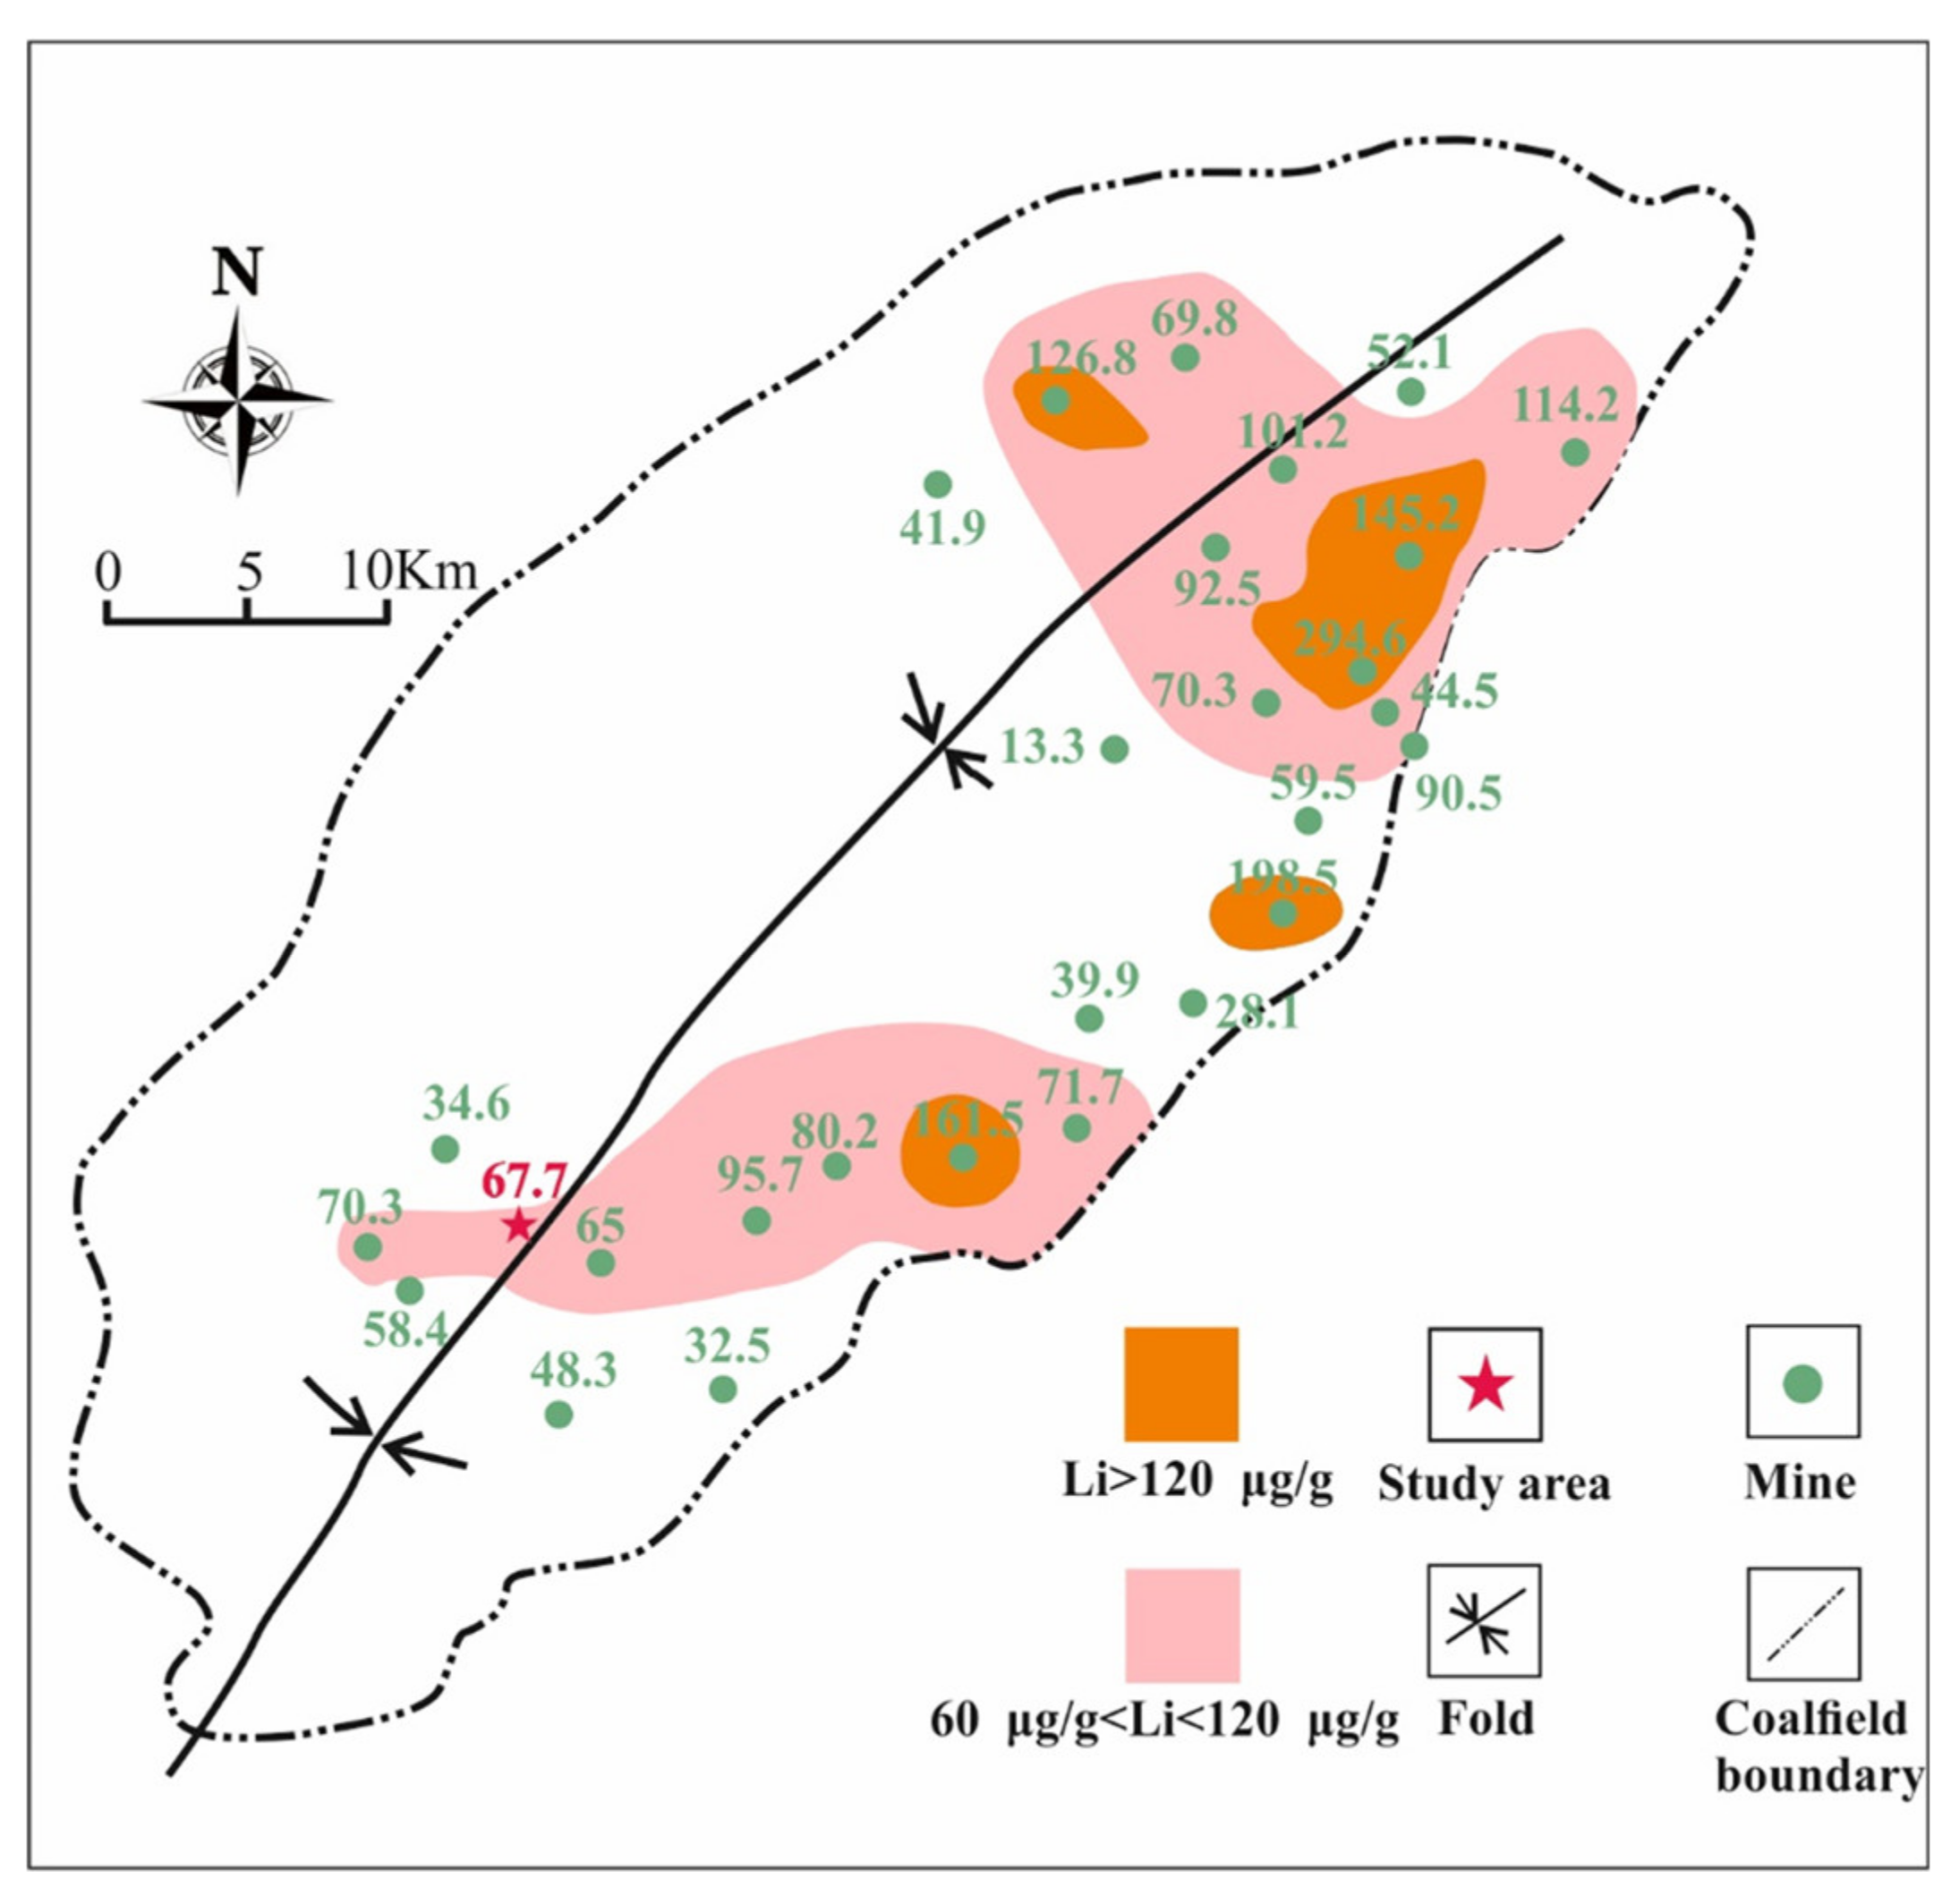 Minerals Free Full Text Geochemistry Of Carboniferous Permian Coal From The Wujiawan Mine Datong Coalfield Northern China Modes Of Occurrence Origin Of Valuable Trace Elements And Potential Industrial Utilization Html